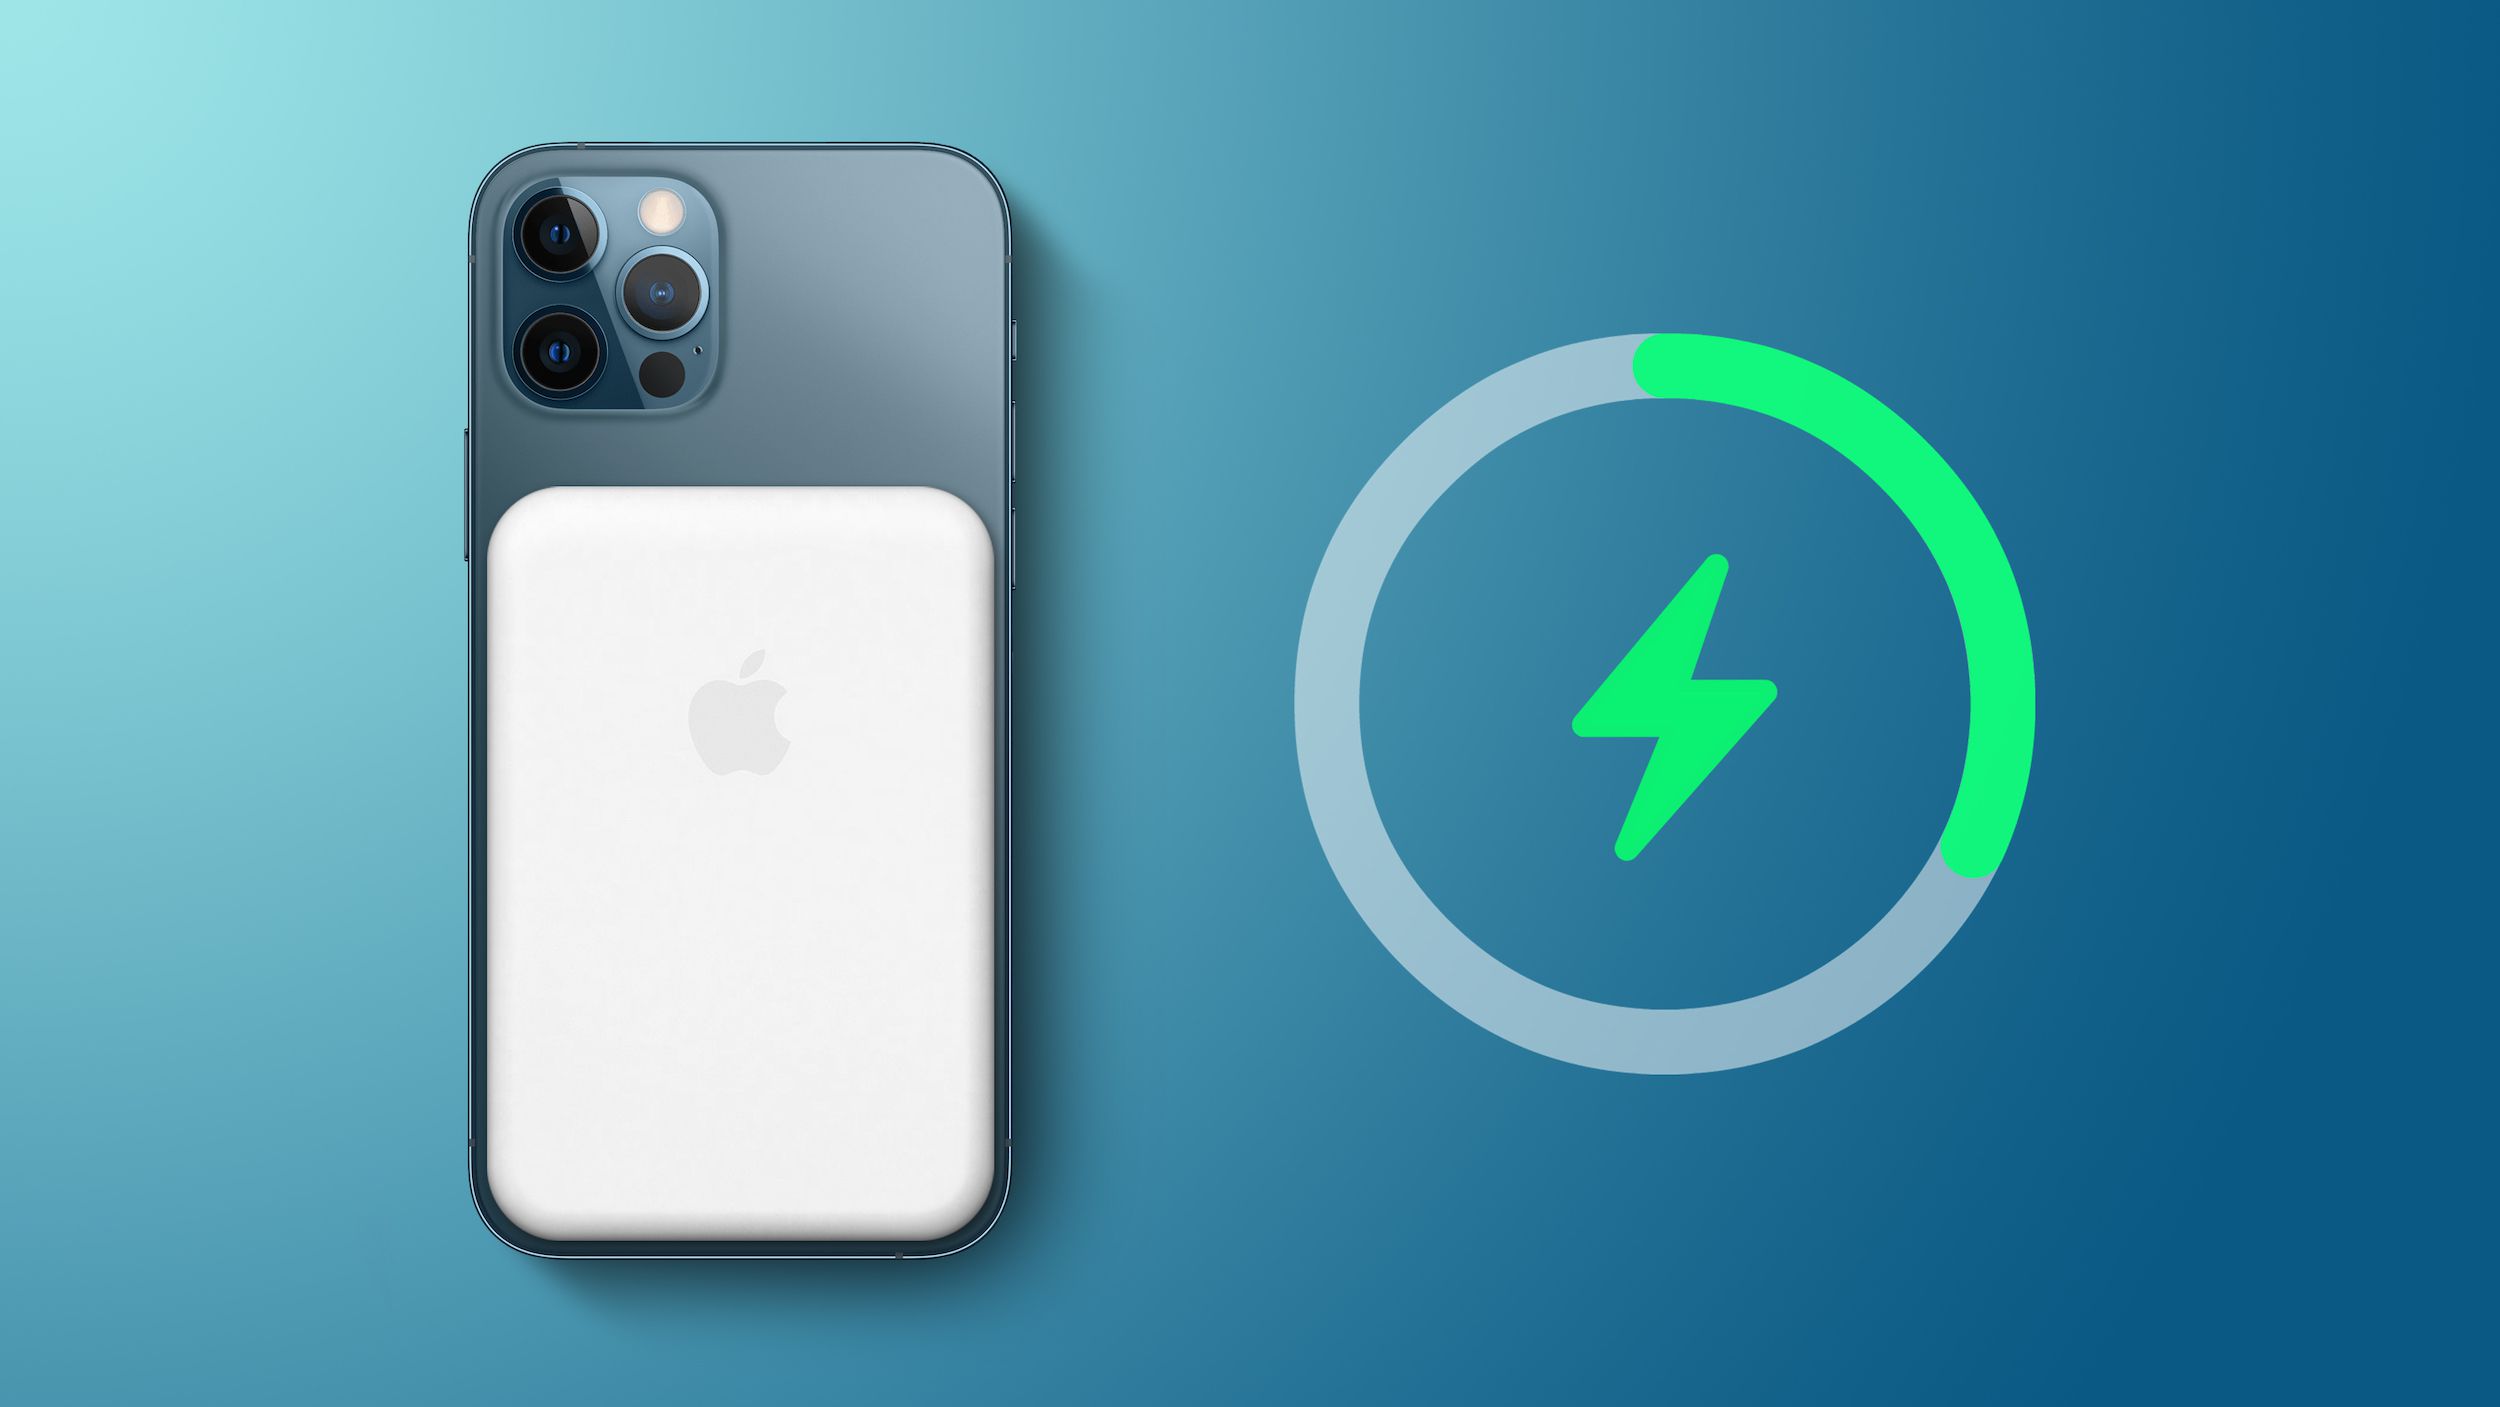 Apple’s upcoming iPhone 12 MagSafe battery pack: all we know